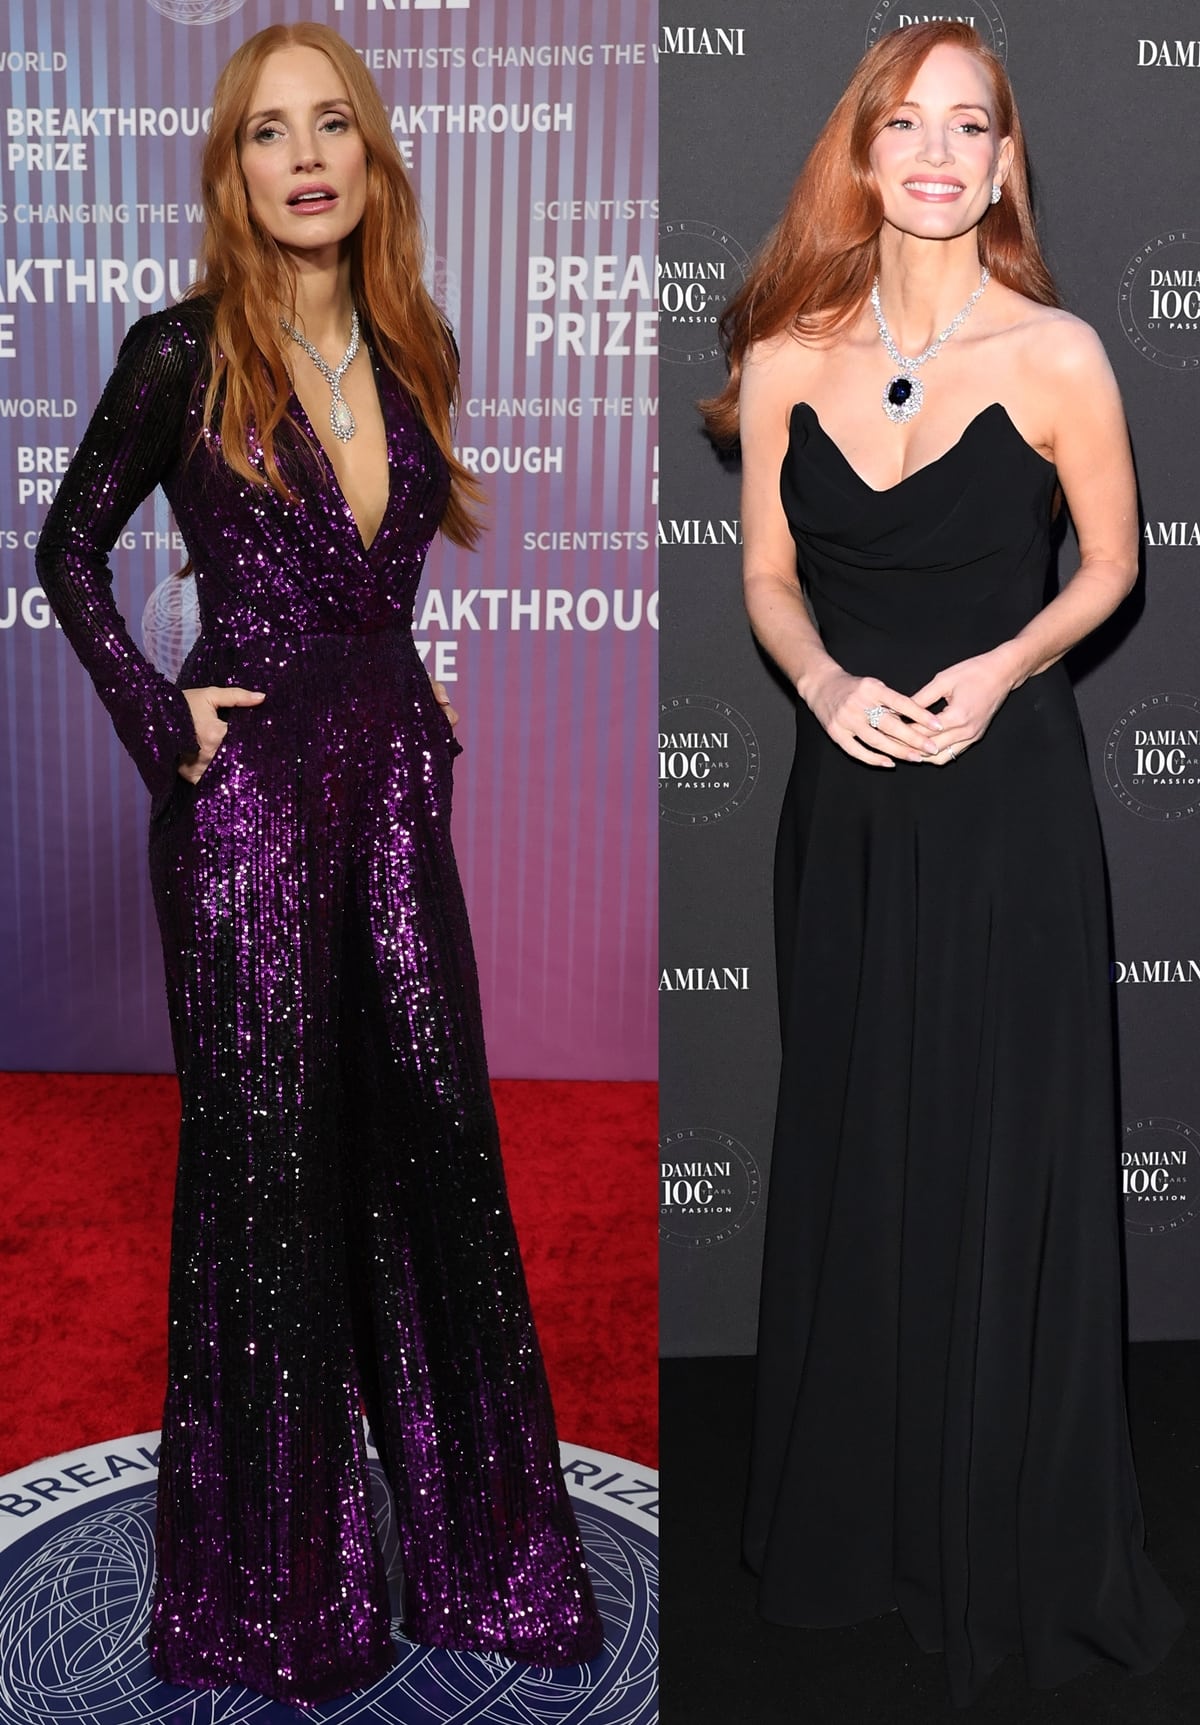 Jessica Chastain captivates in contrasting styles, first sparkling in a purple sequined Elie Saab jumpsuit at the Breakthrough Prize Ceremony, then embodying timeless elegance in a classic black strapless gown at Damiani's centennial celebration